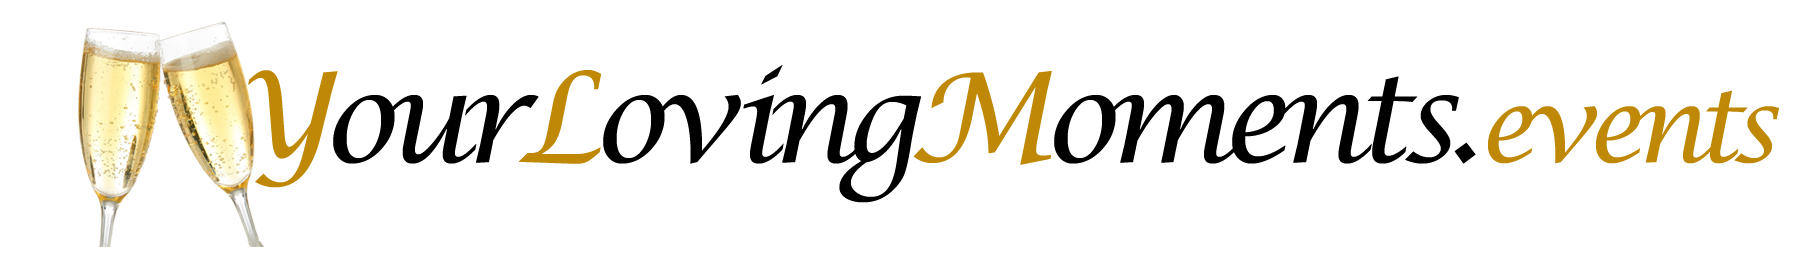 YLM.events-champagne-Logo